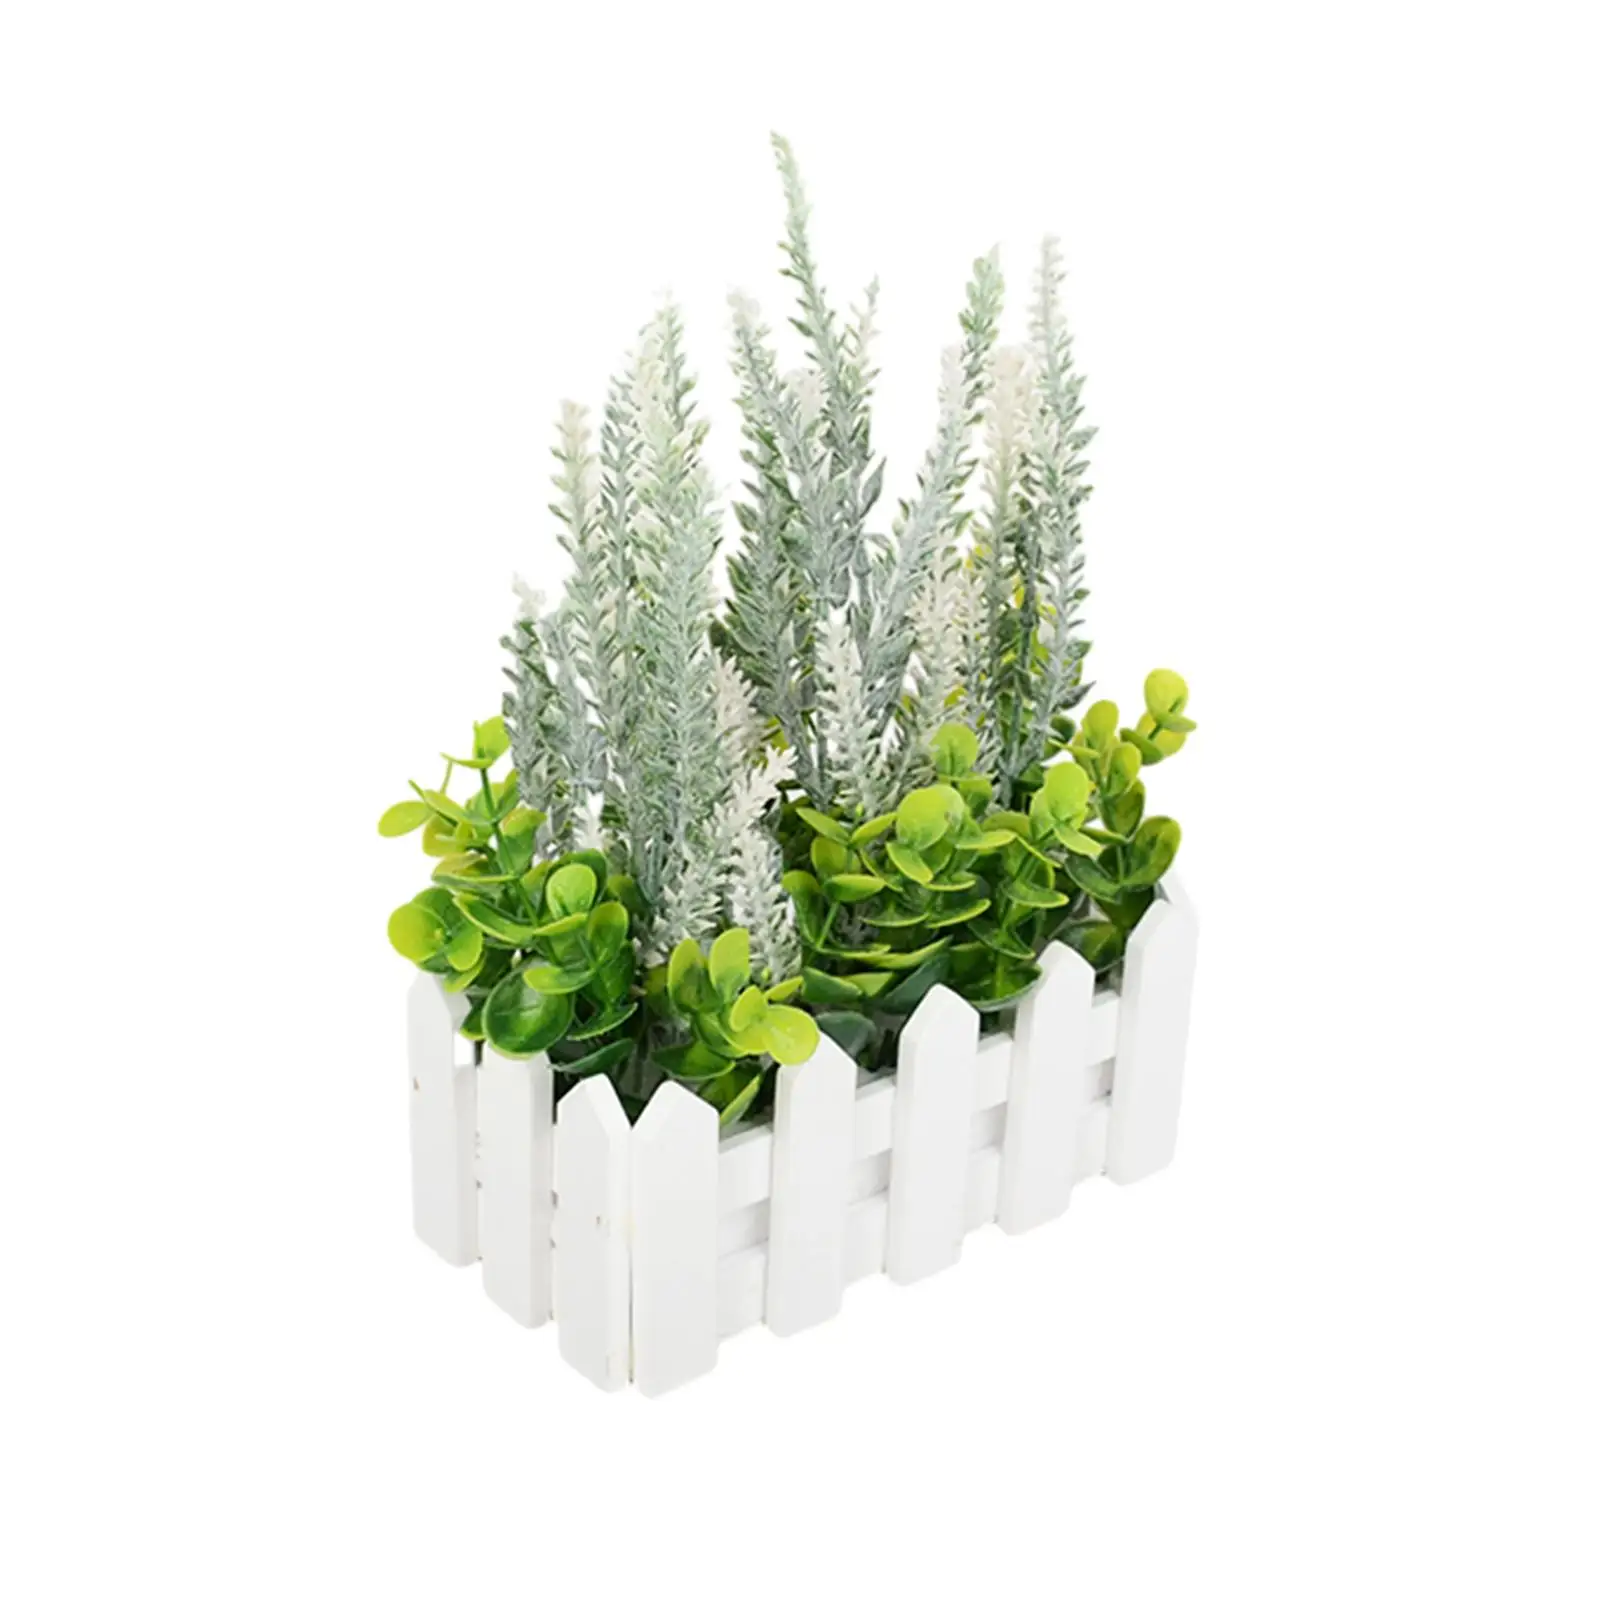 Artificial Flower Potted Plant Desktop Decoration Potted in Picket Fence Desk Ornament, Faux Flowers for Farmhouse, Wedding